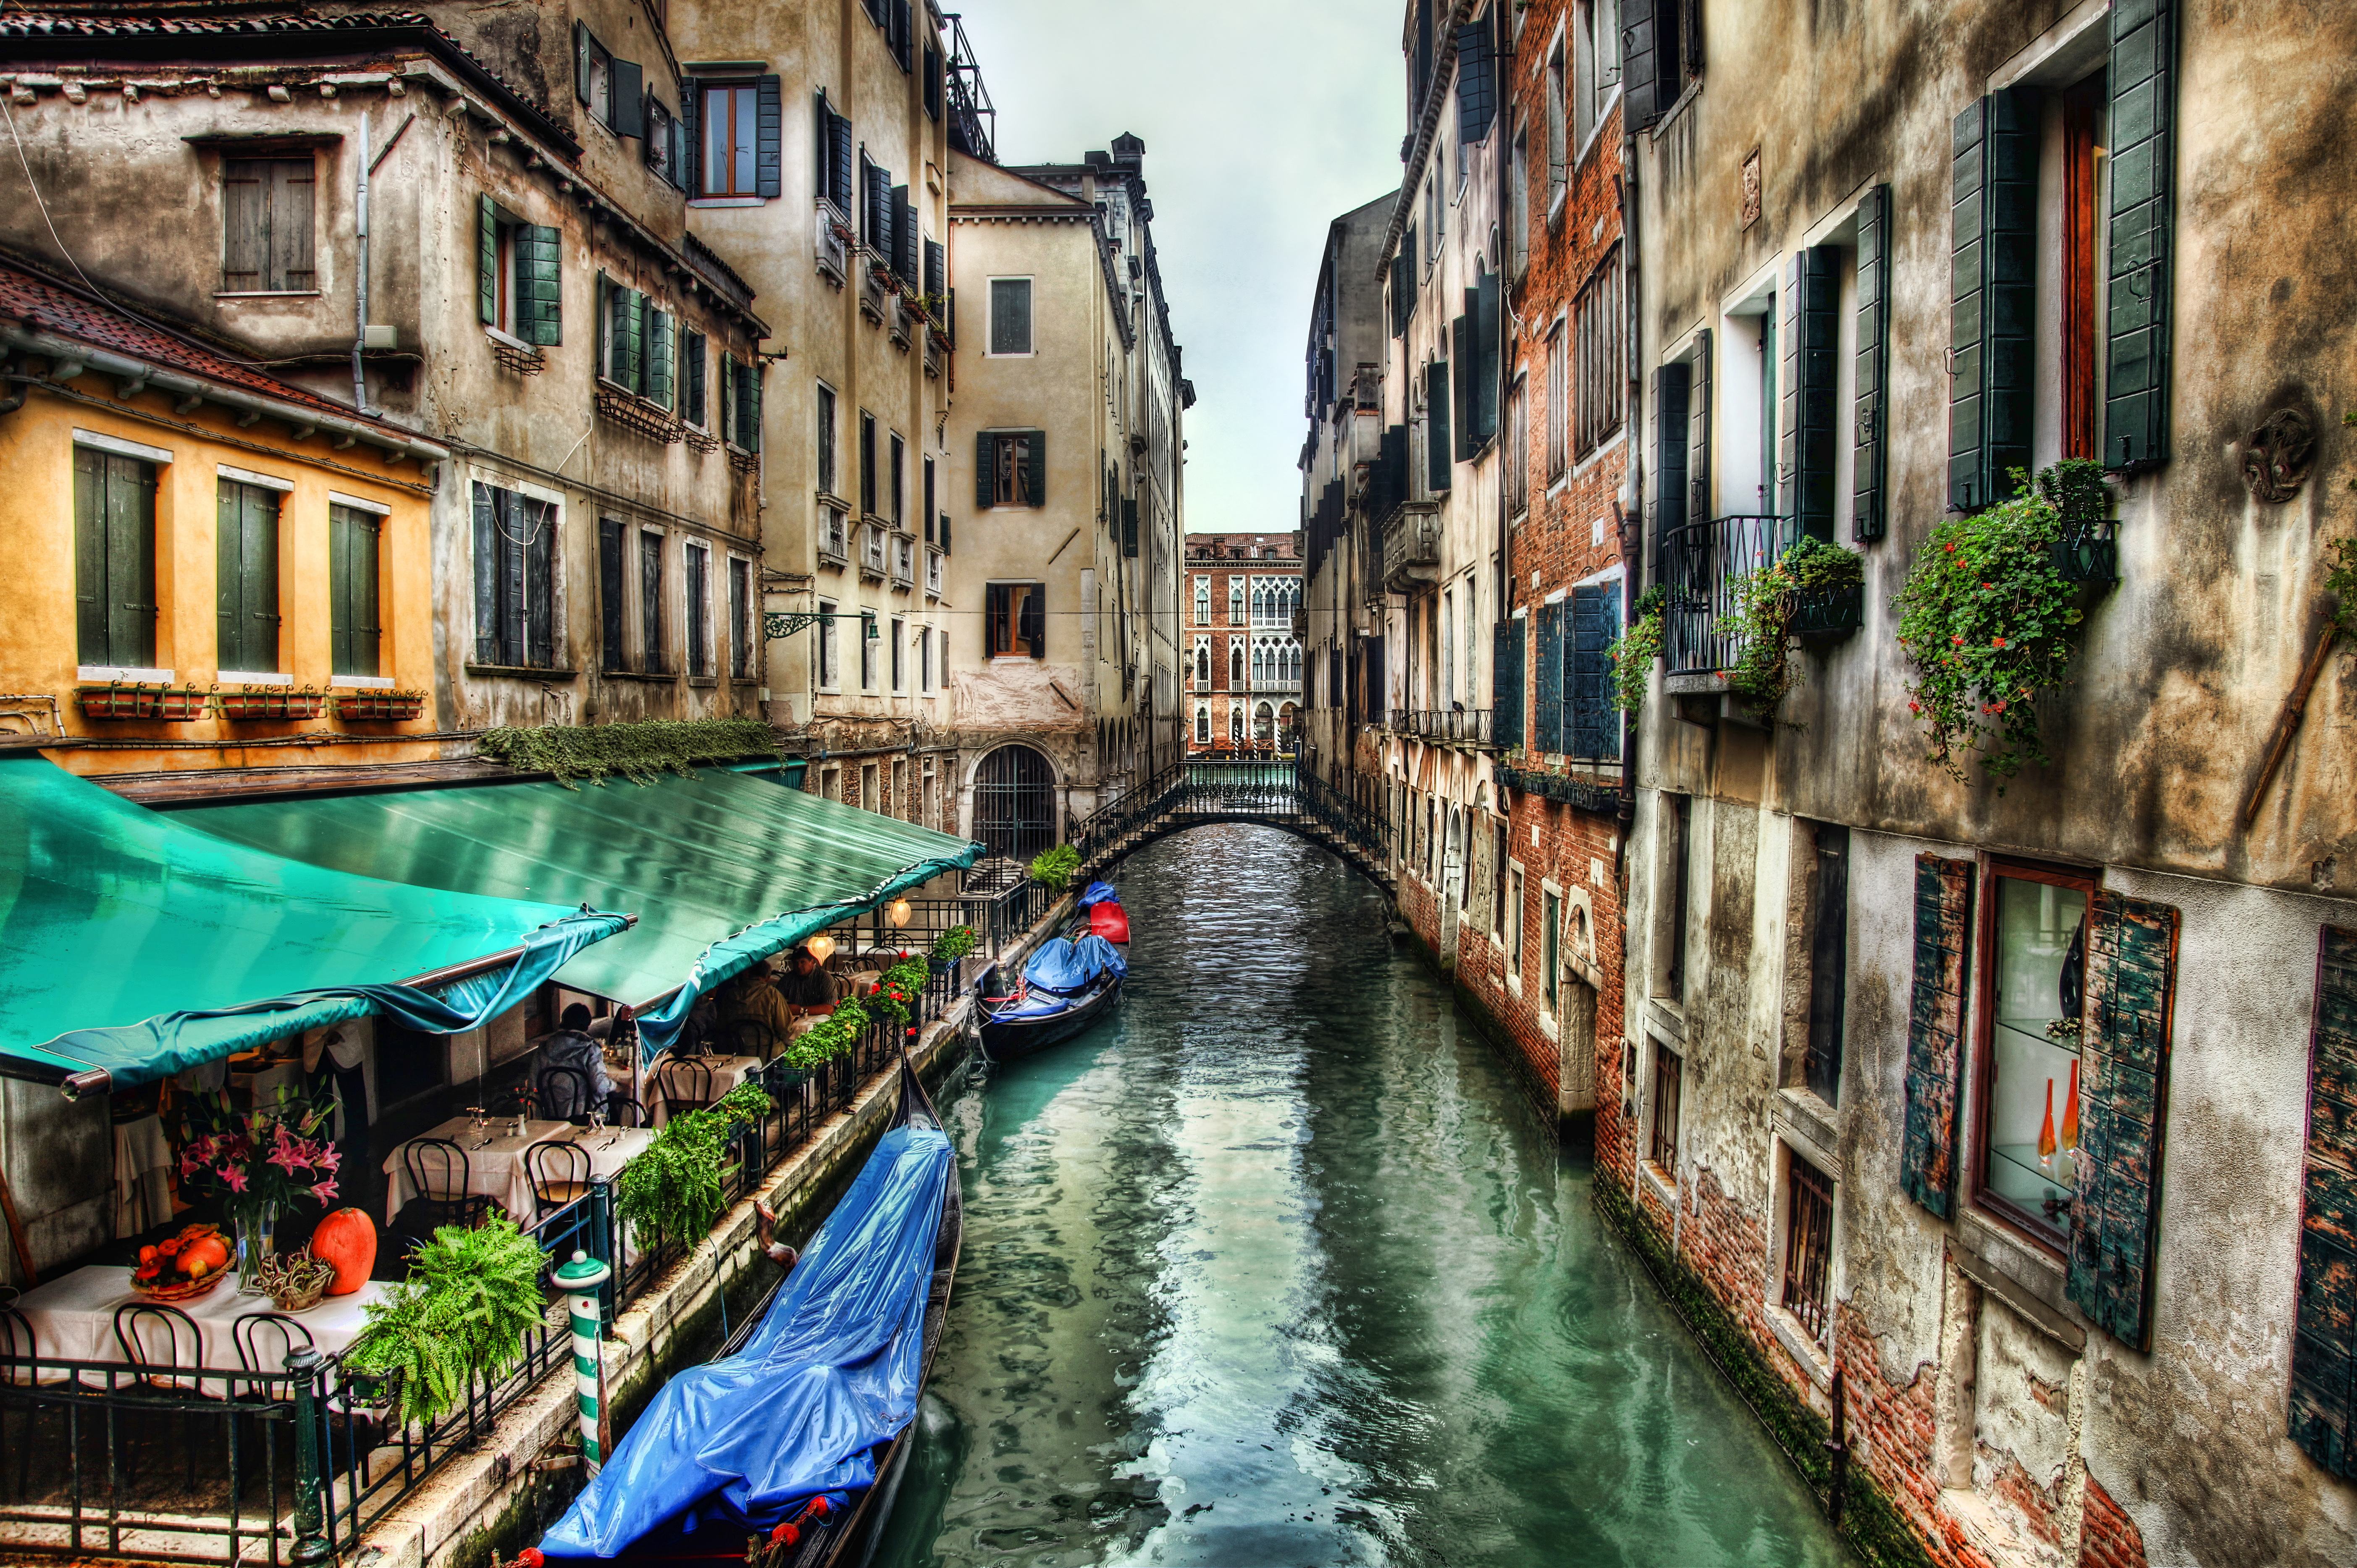 venice, hdr, man made, building, canal, city, house, italy, restaurant, cities